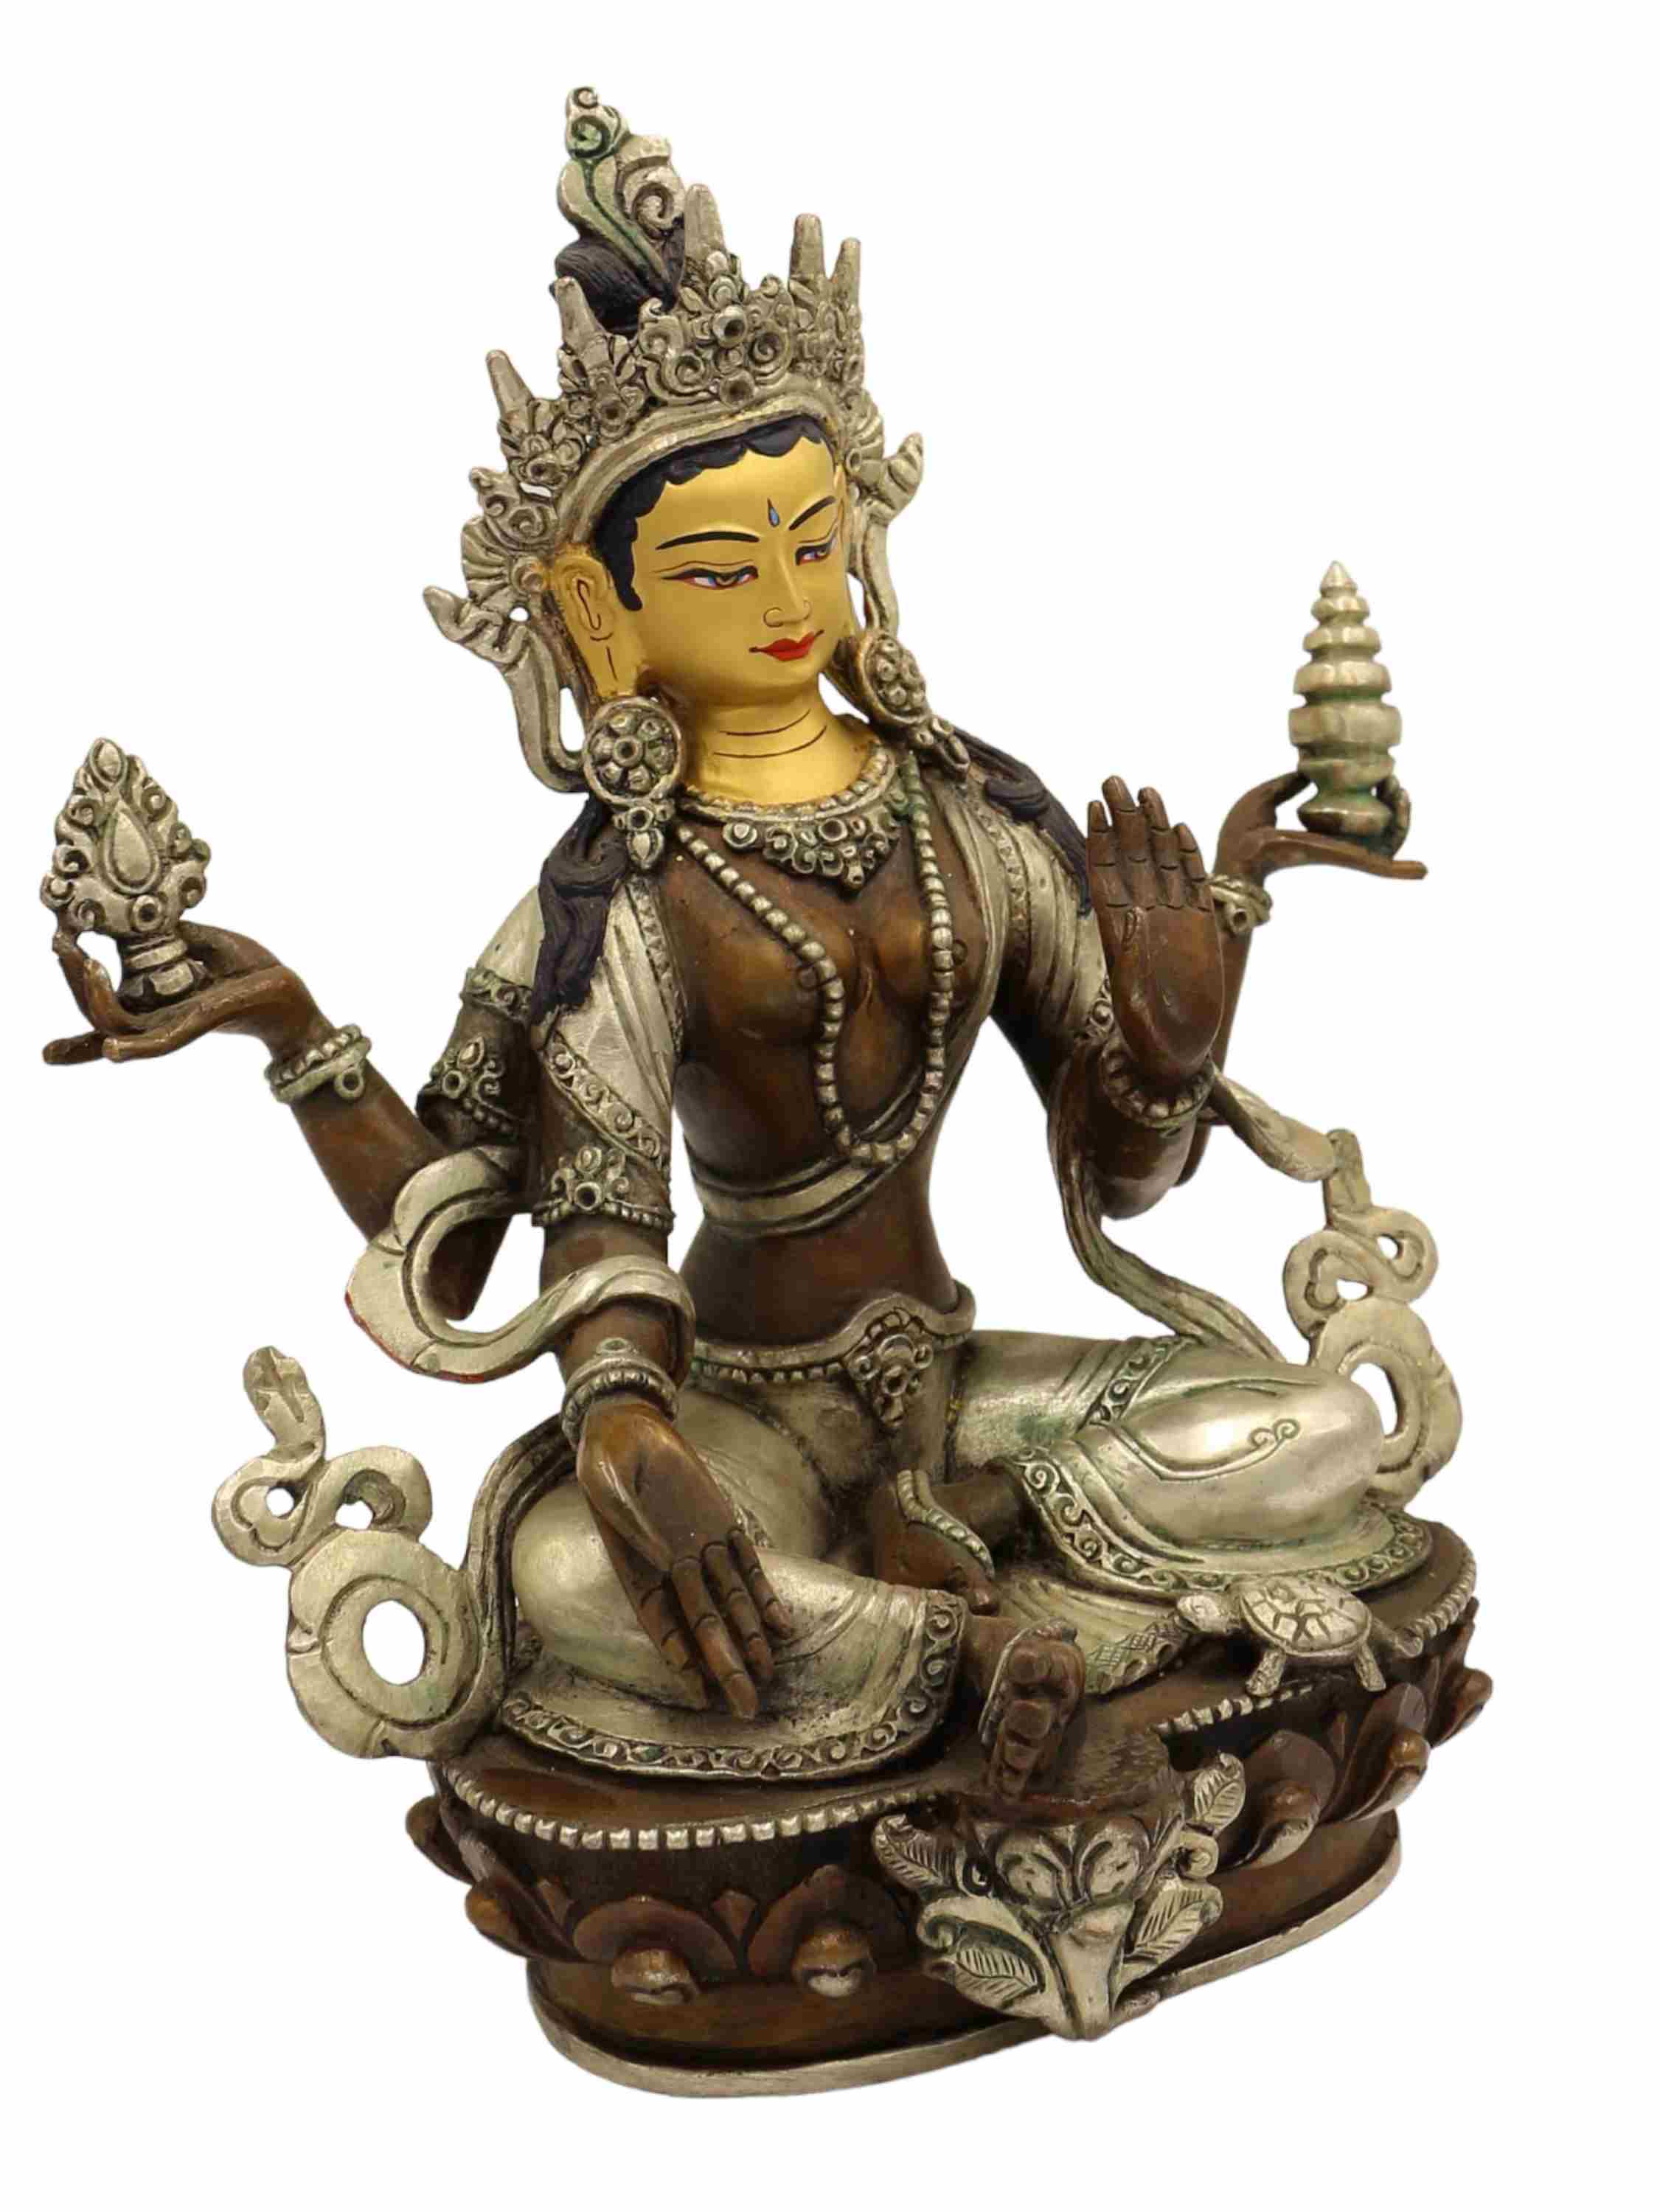 Buddhist Handmade Statue Of lakshmi, chocolate Oxidation With Silver Plating, With Painted Face